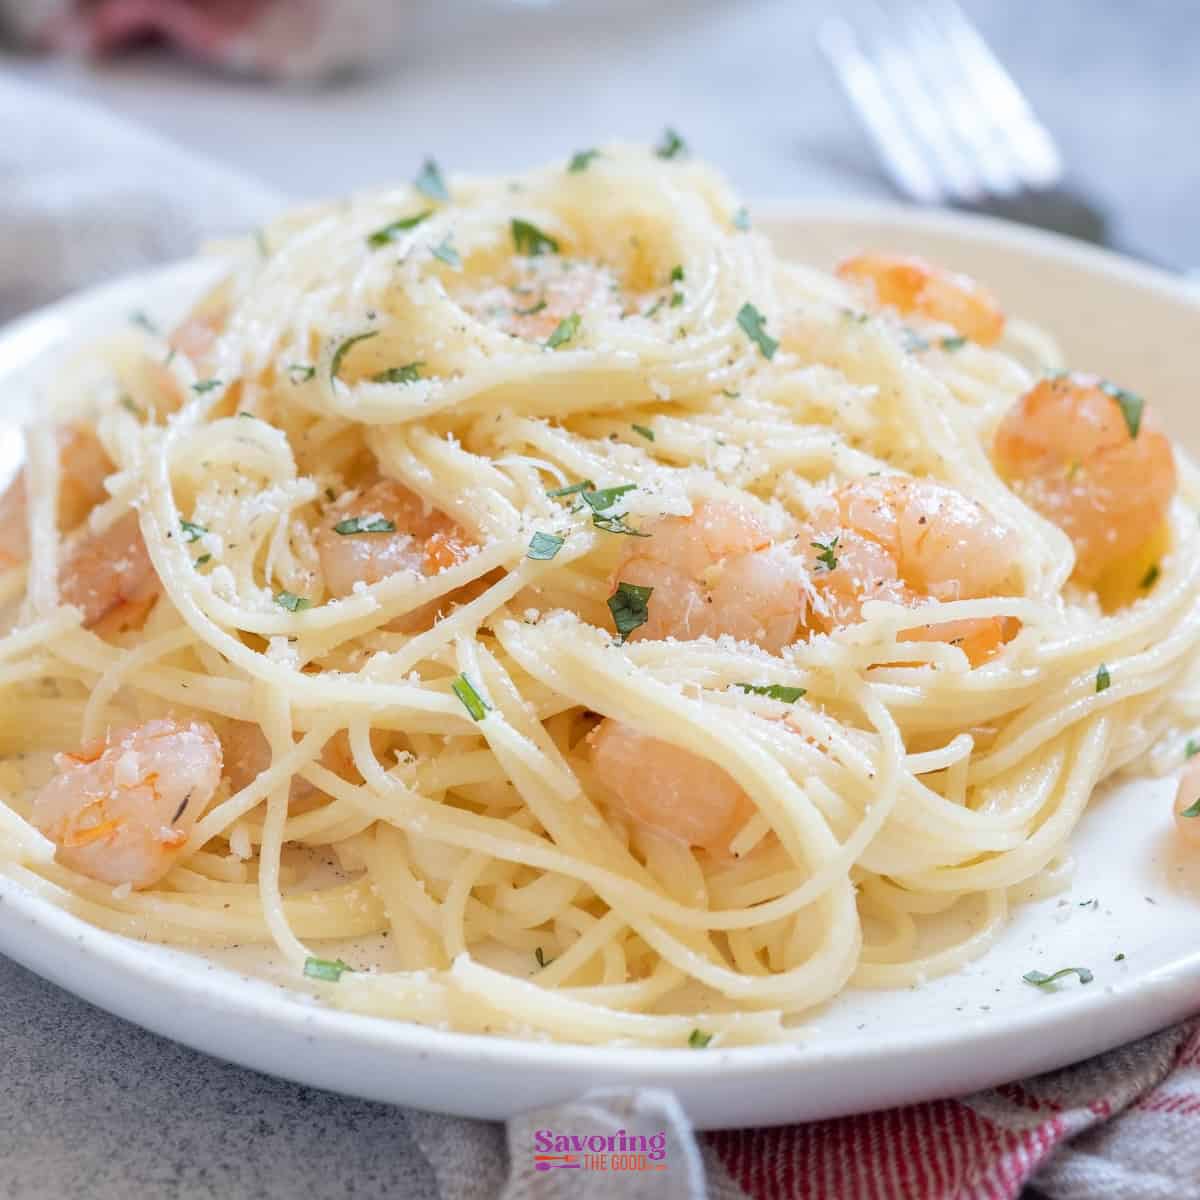 Shrimp scampi cooked with spaghetti and topped with parmesan cheese.